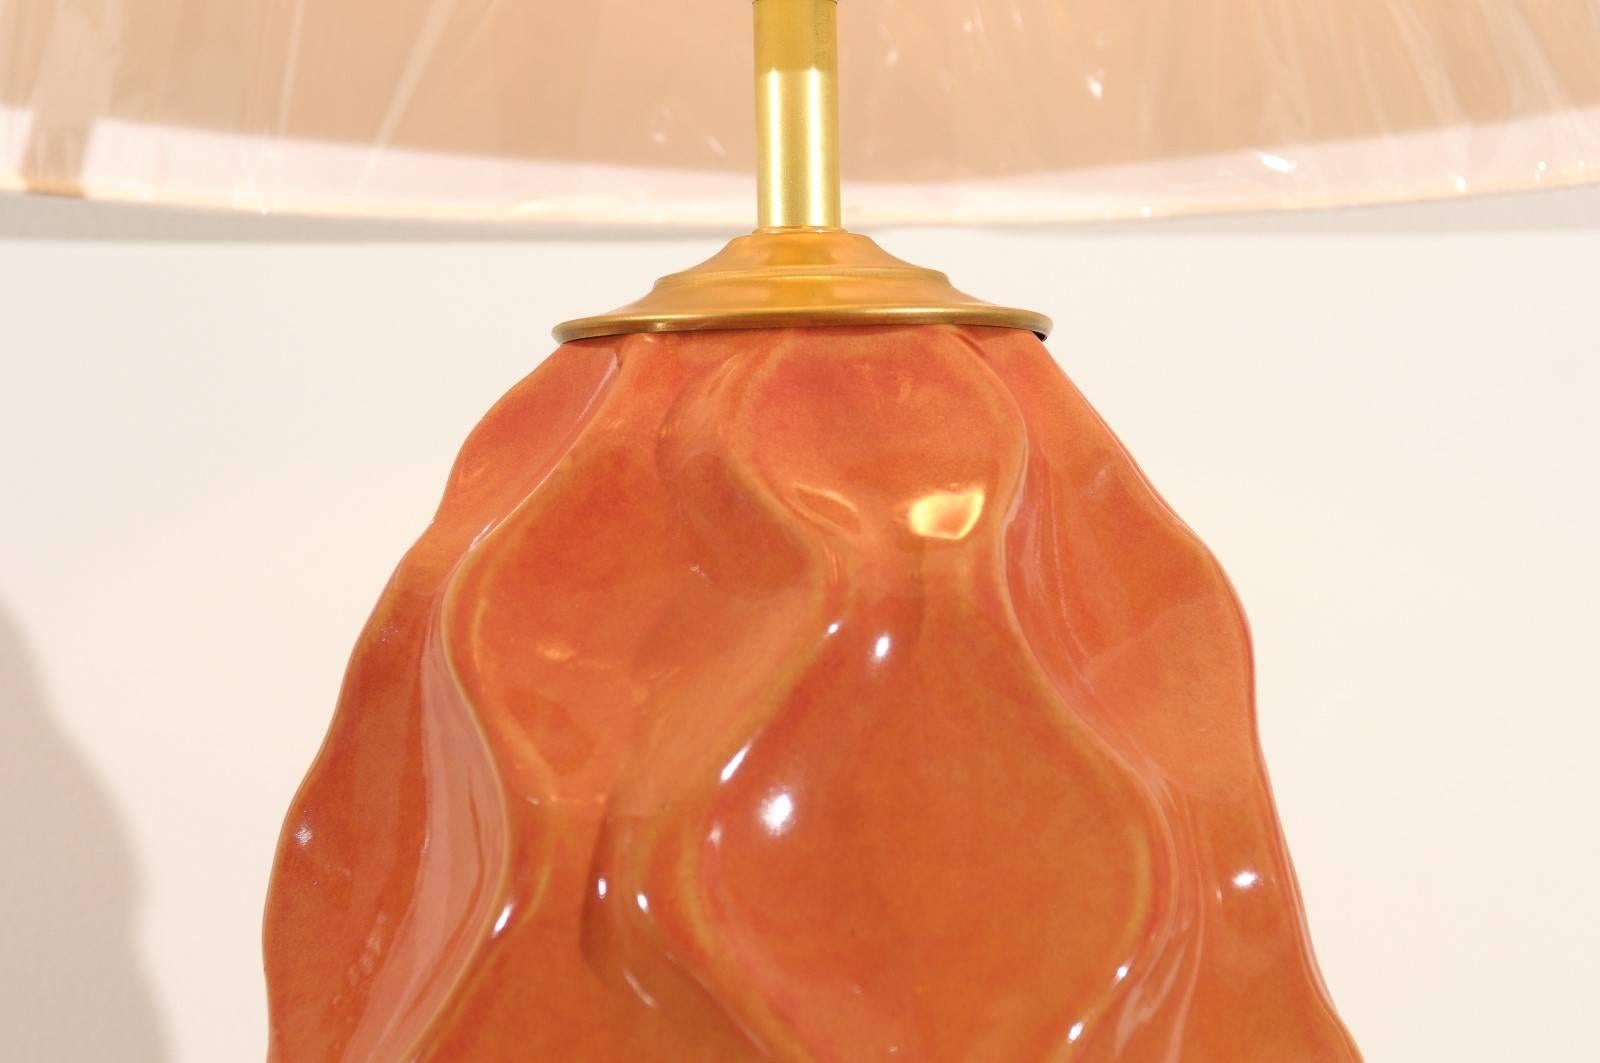 Dazzling Pair of Large-Scale Faceted Ceramic Lamps in Aged Orange In Excellent Condition For Sale In Atlanta, GA